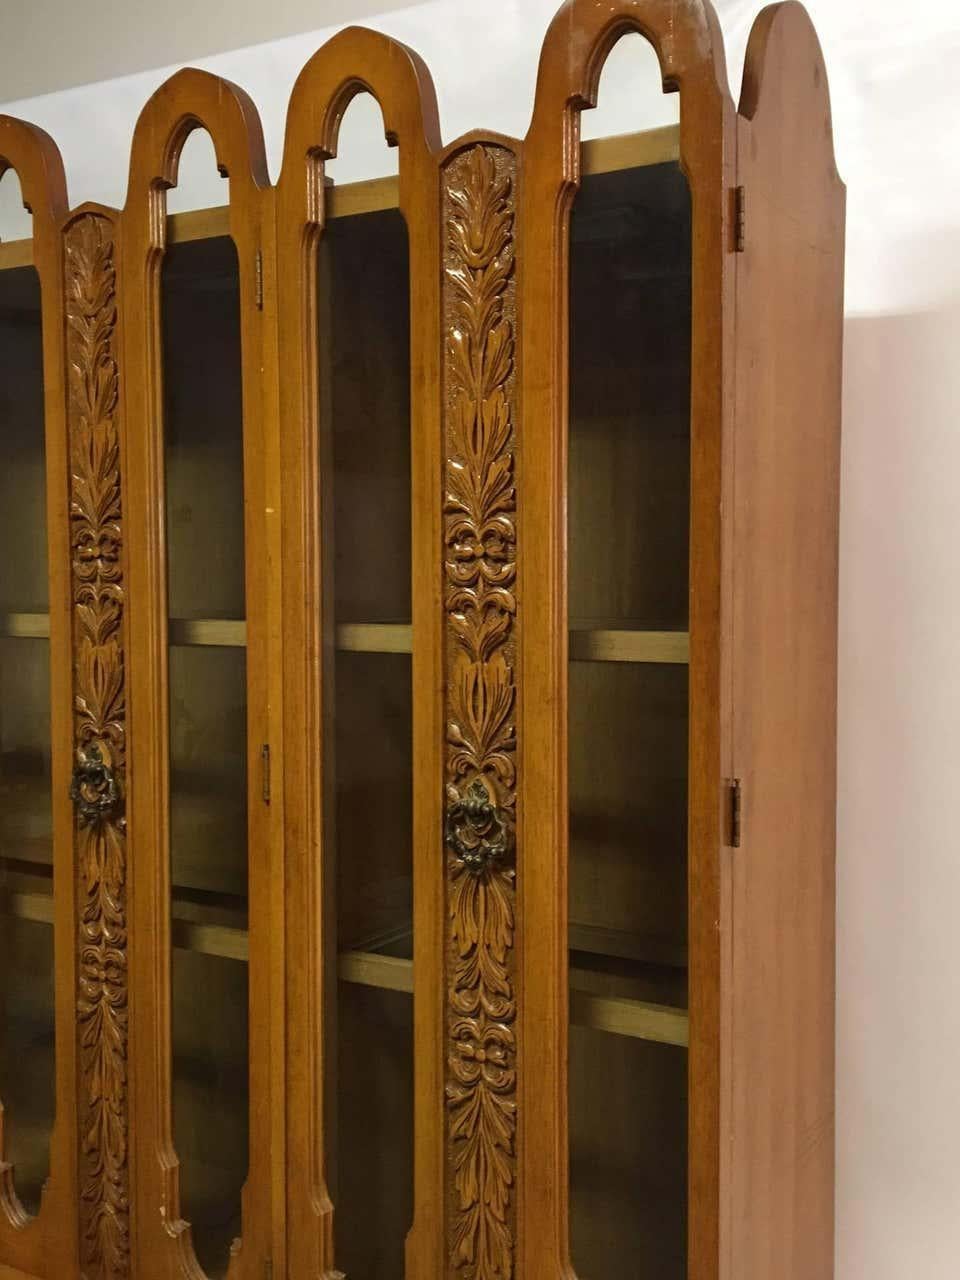 Monumental mid-century china cabinet. Beautiful ornately carved detail surrounds the front glass doors. Top hutch features interior lights and glass display shelves. Lower credenza or sideboard features interior drawers and shelves. Good condition